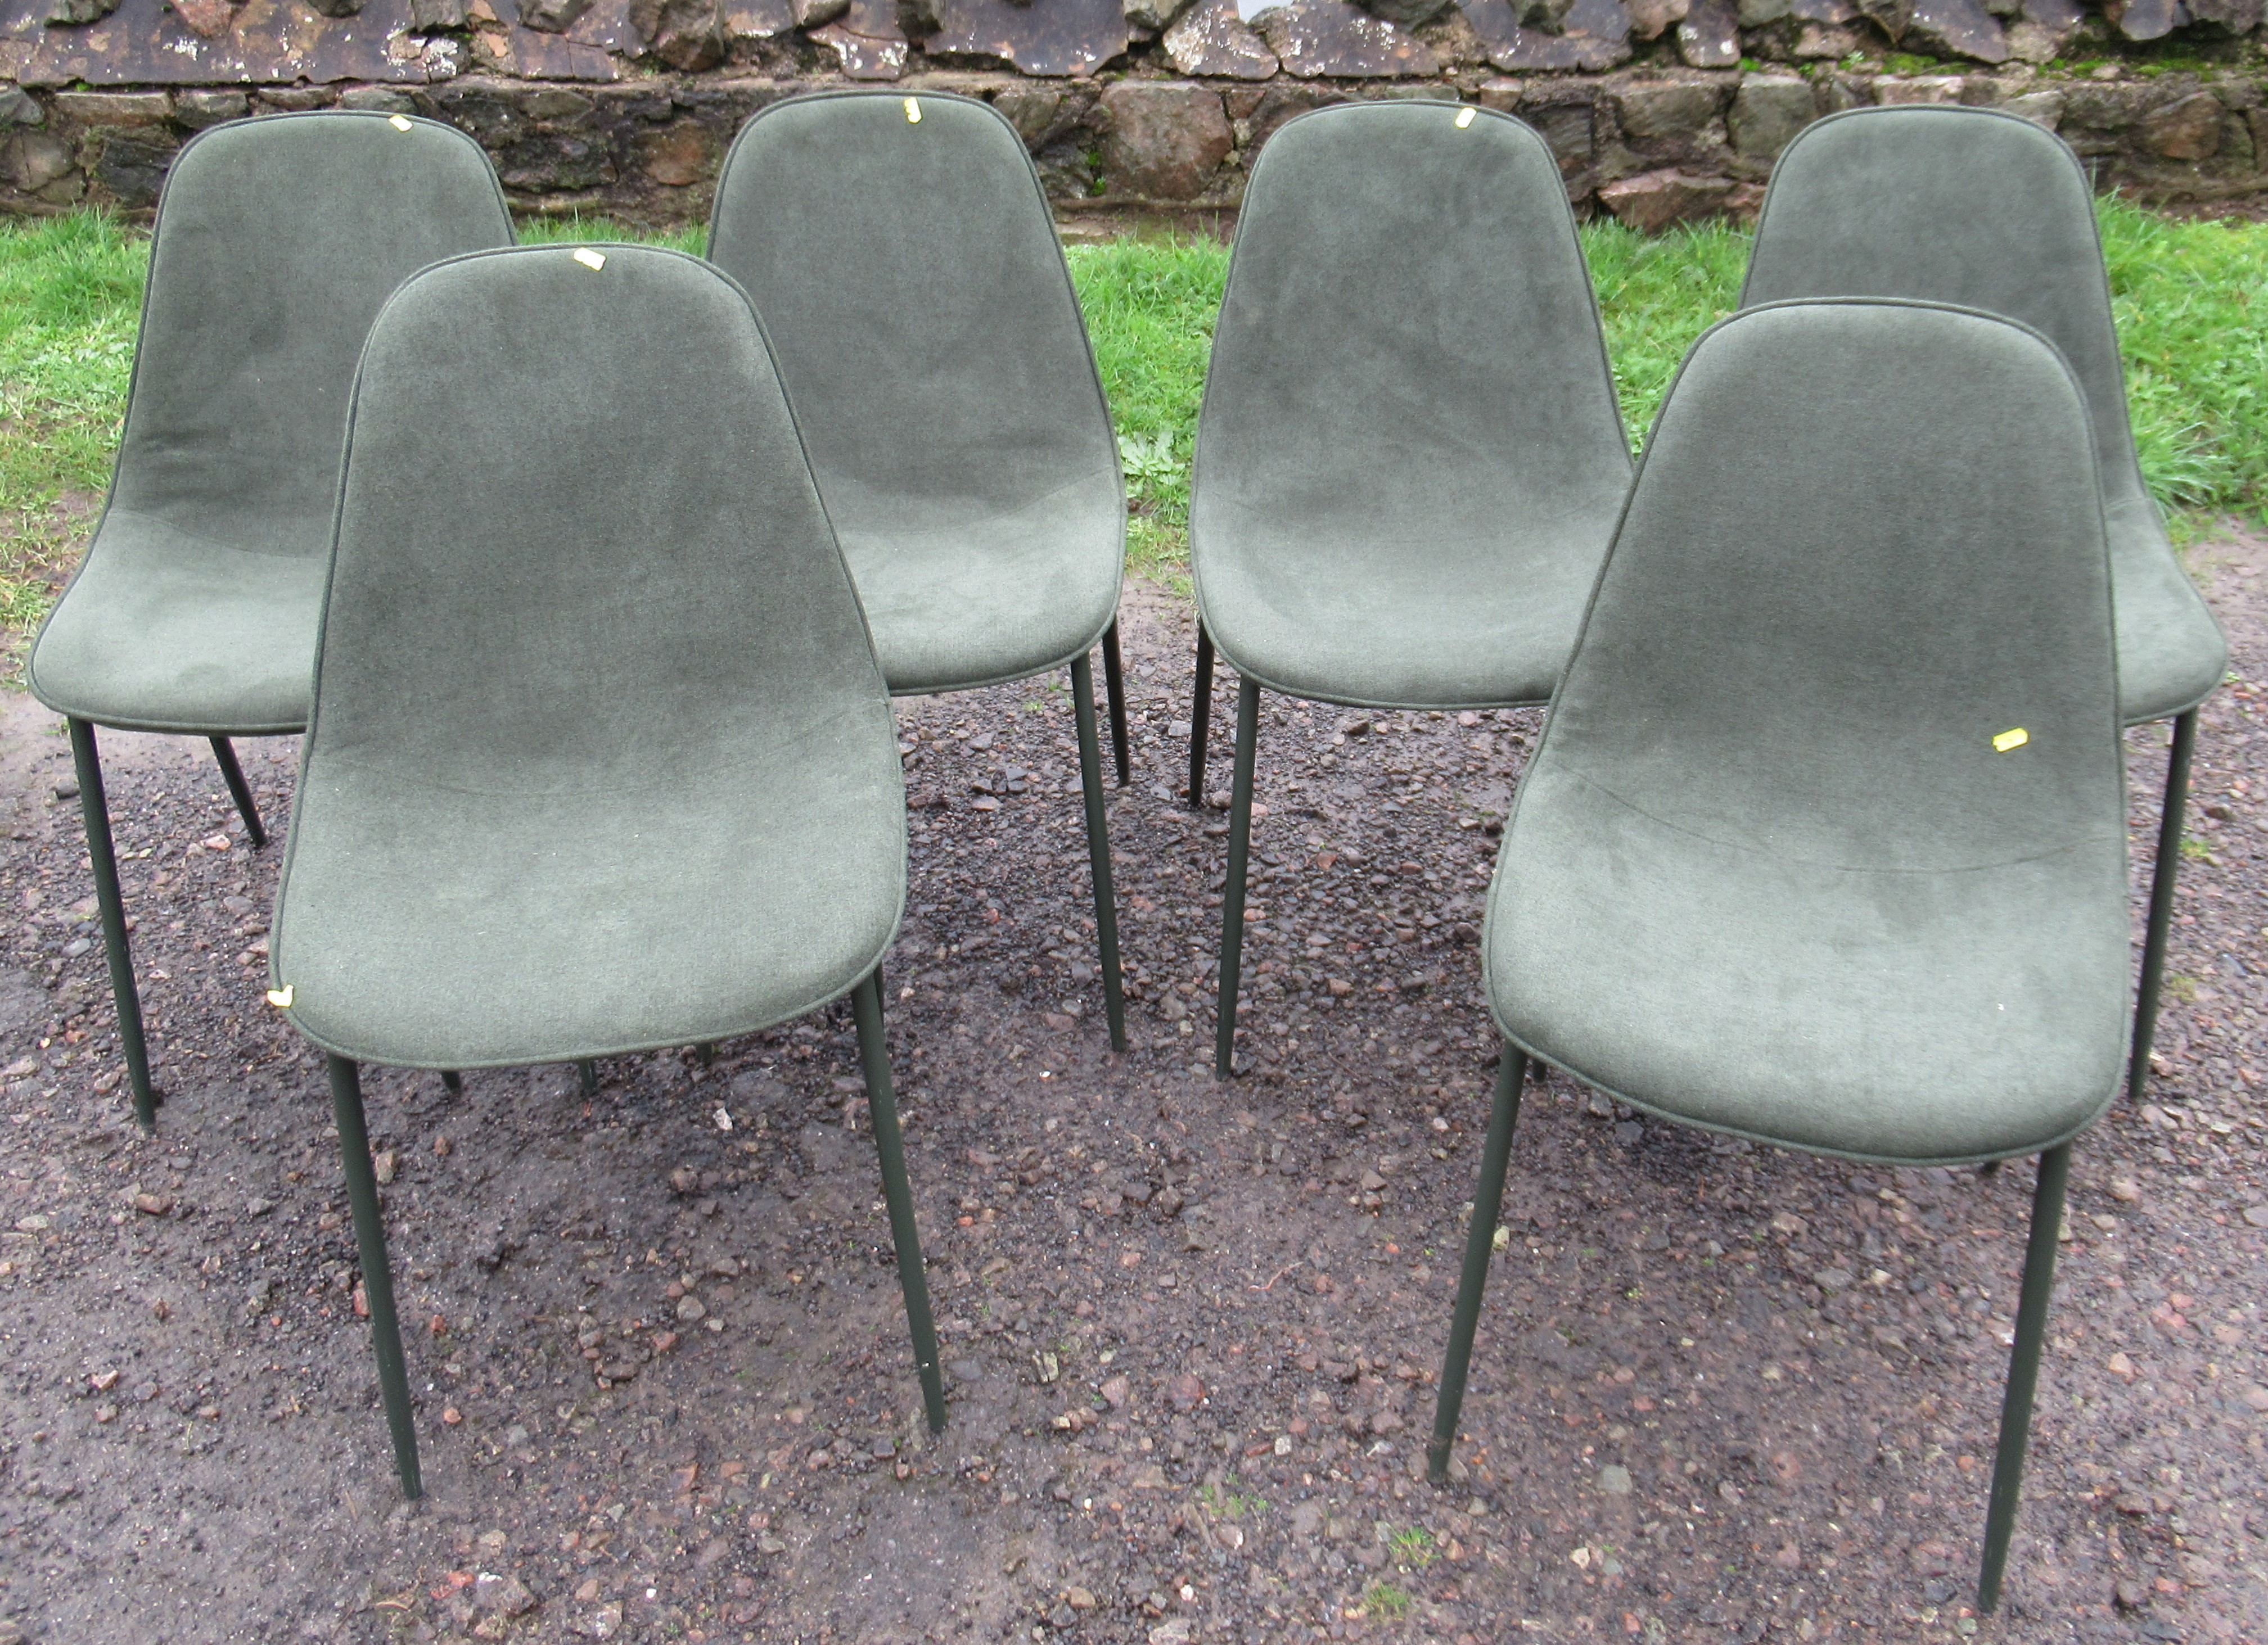 A set of six green upholstered dining chairs - No Fire Labels  and one other chair